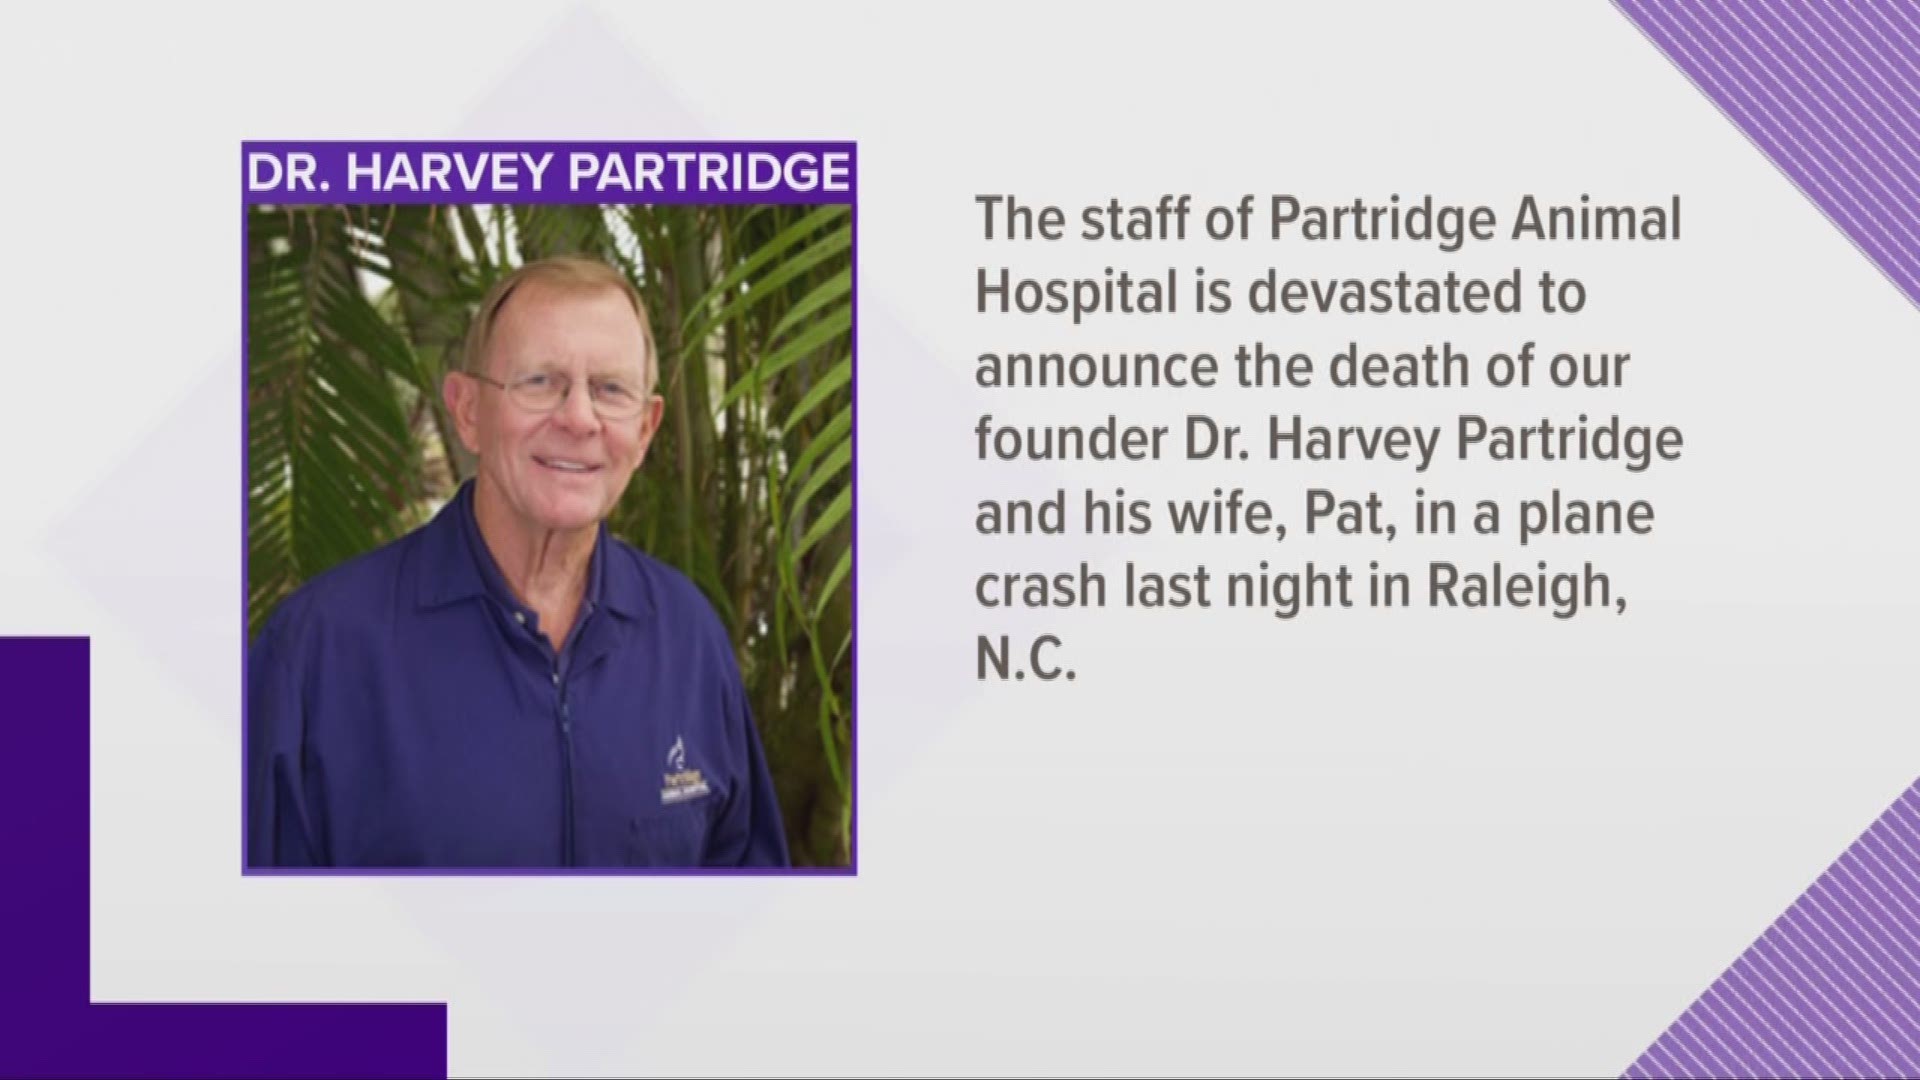 The airport confirmed in a news release that the veterinarian and his wife were killed when their plane went down Sunday night. https://bit.ly/32AUh95